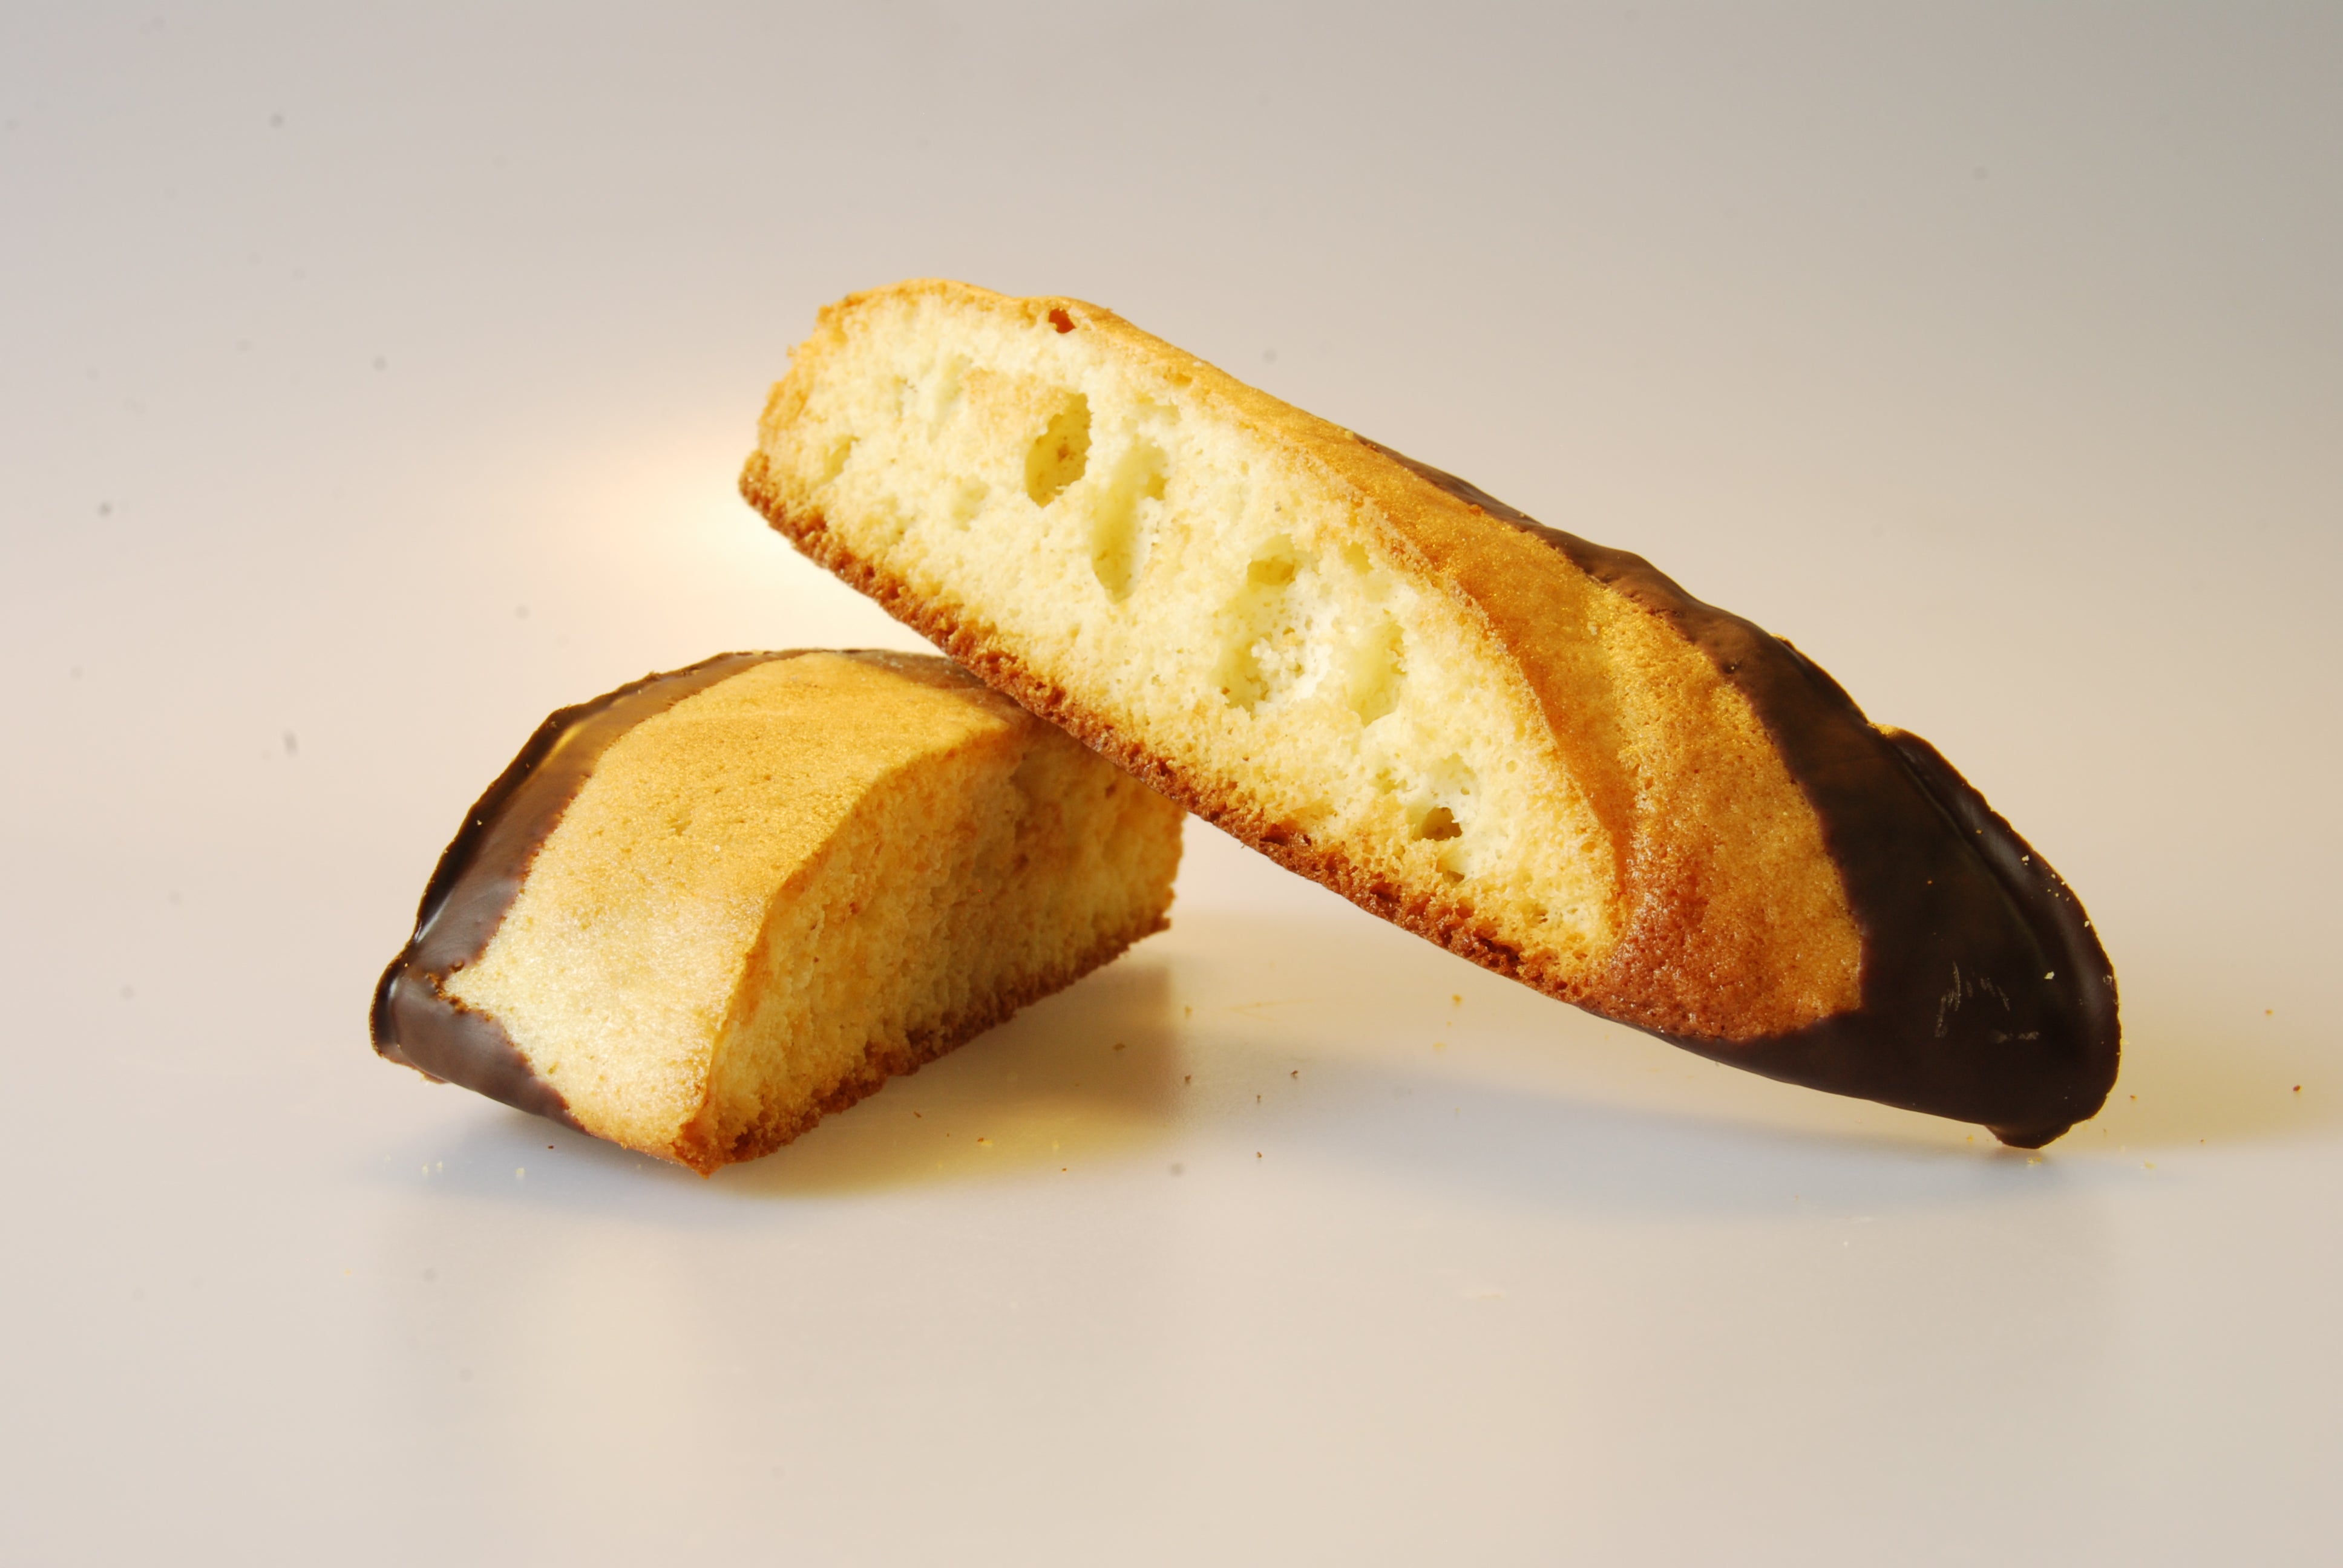 Biscotti, Plain (Anise) Dipped